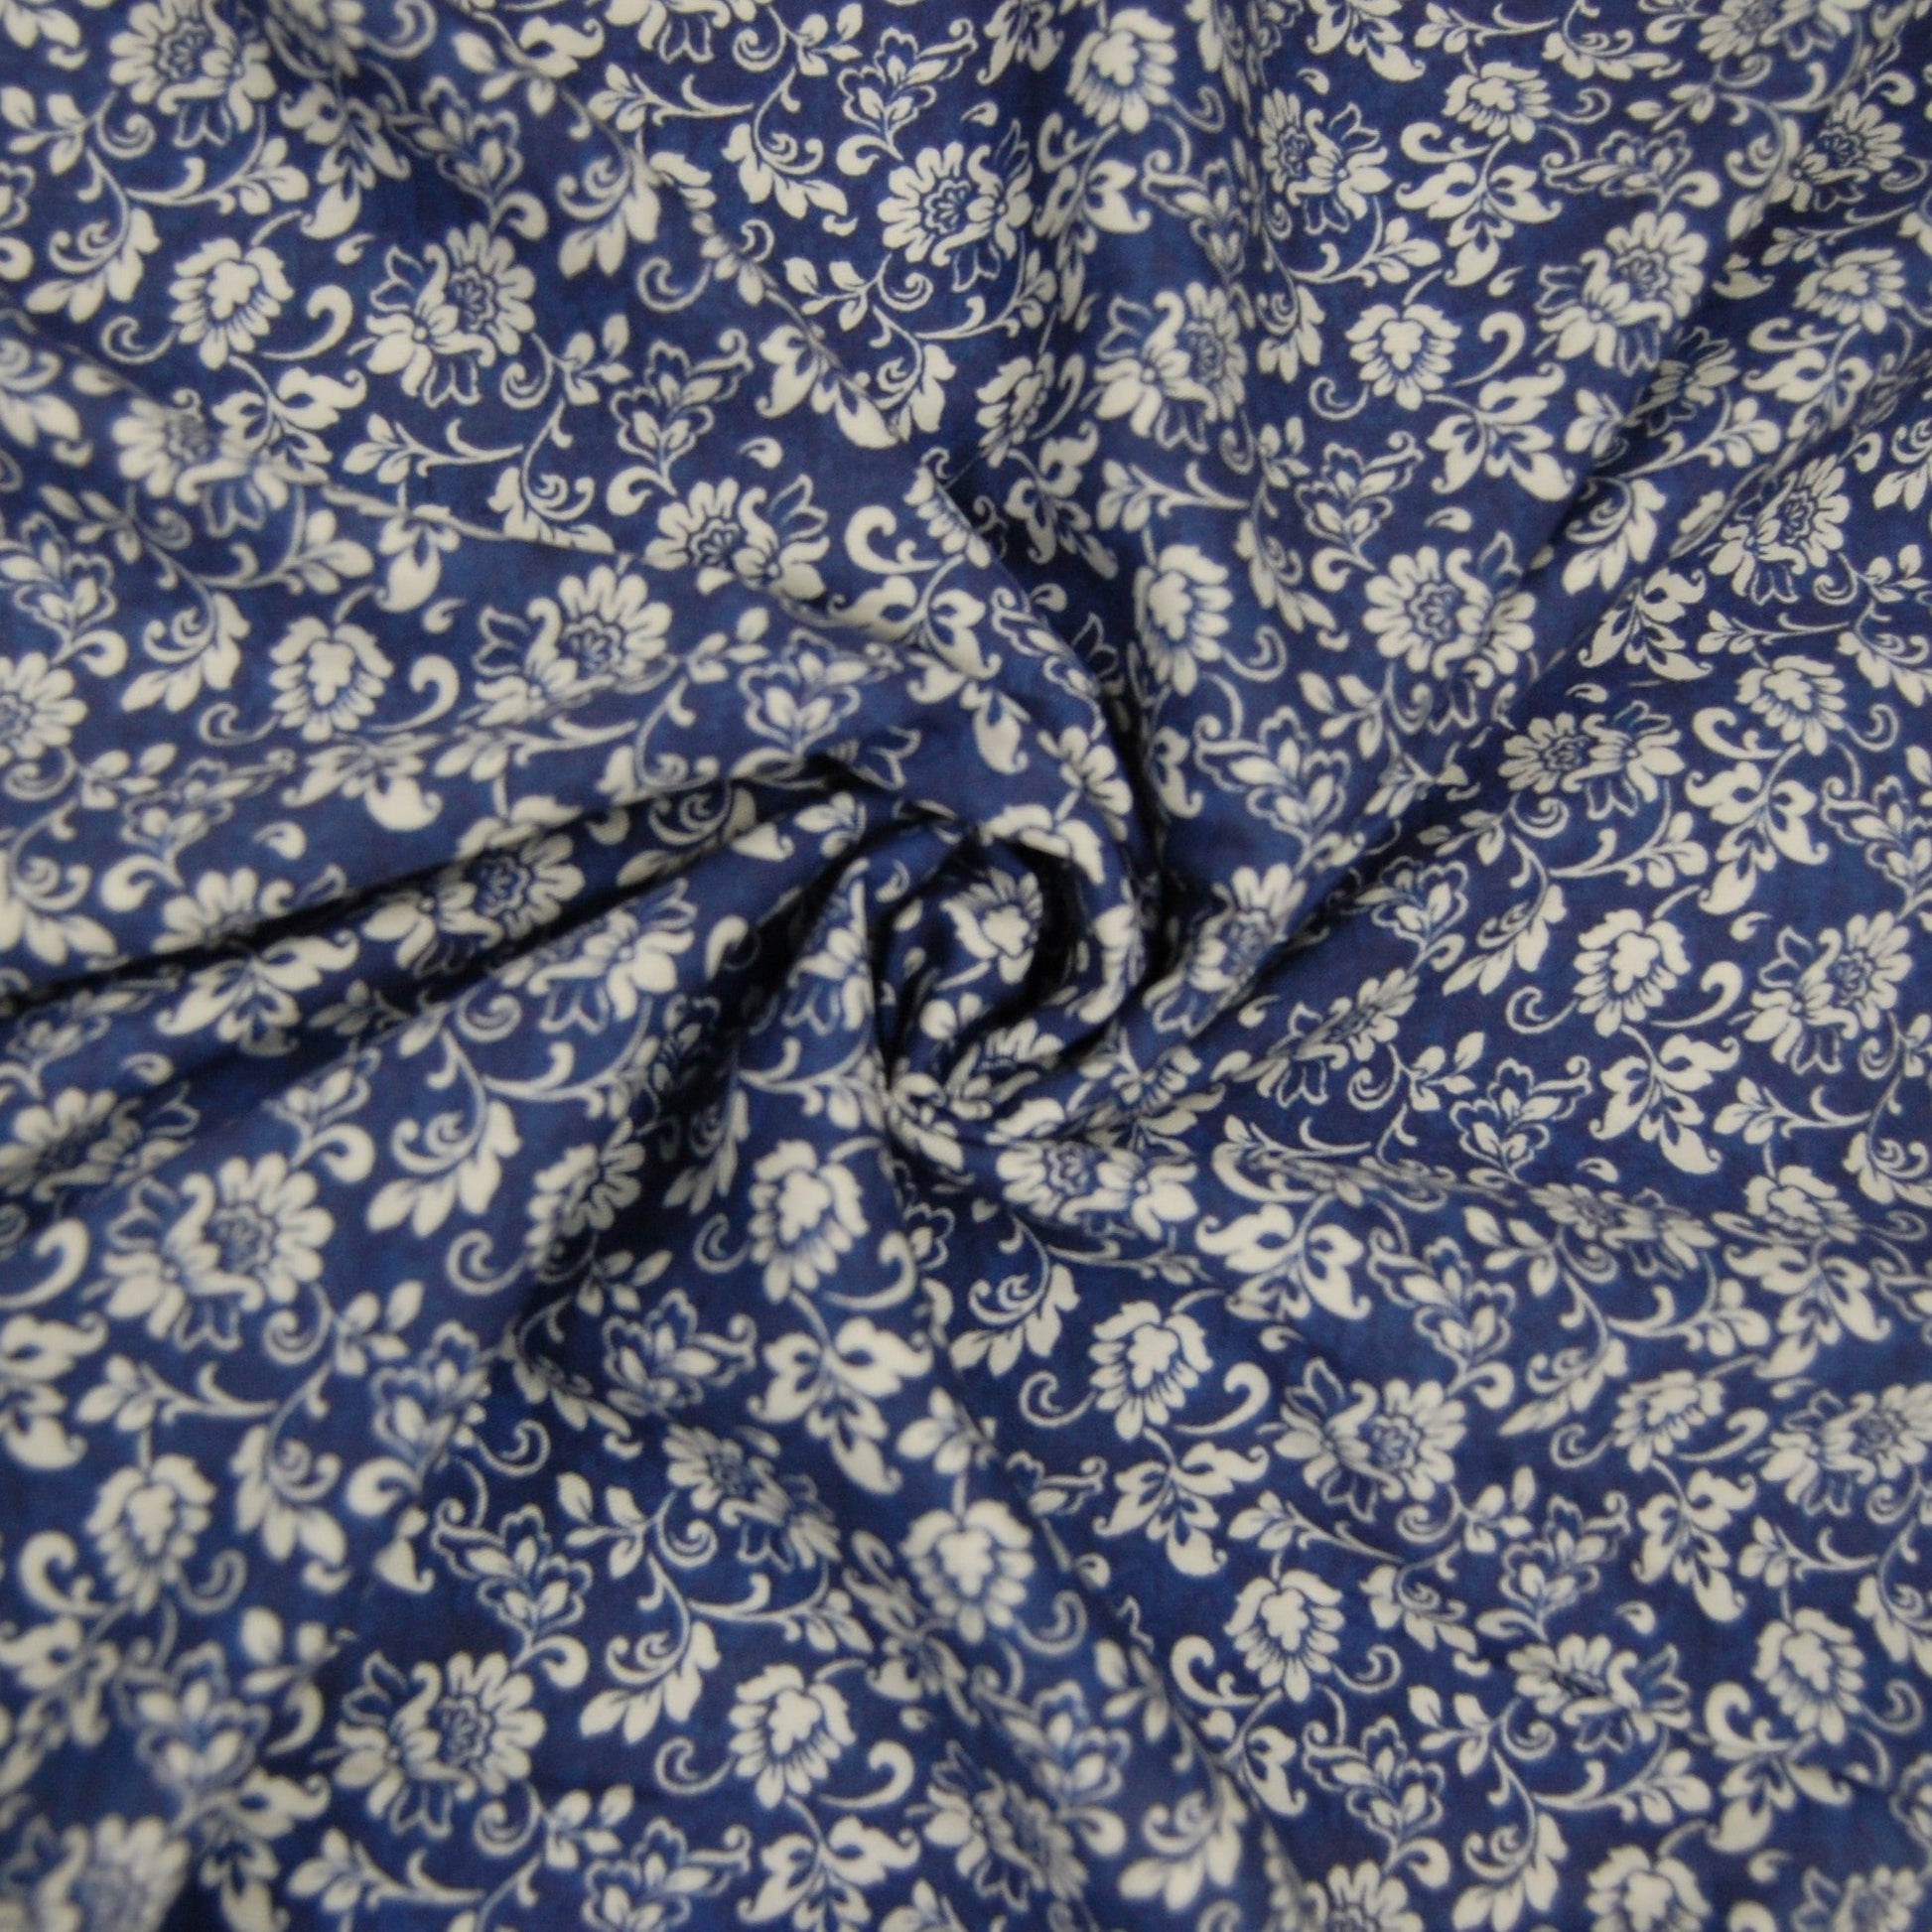 Blue Floral Print Viscose Fabric Plain Weave 60 Inches